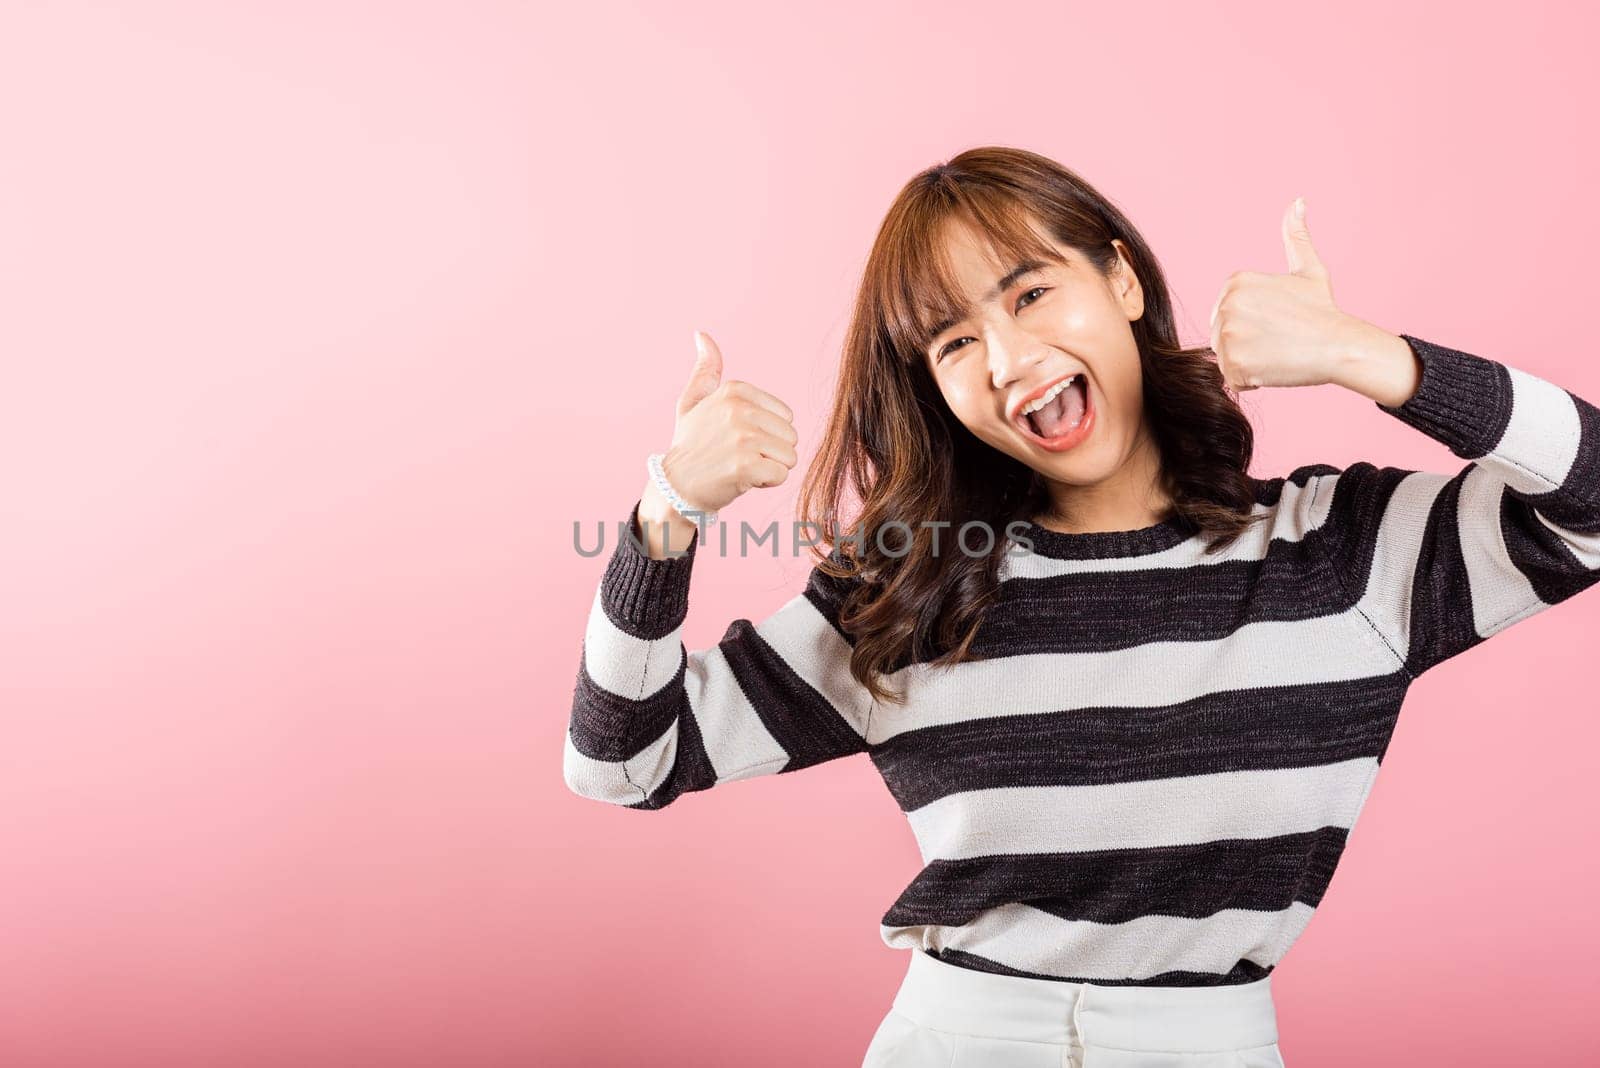 In a pink studio shot, a smiling Asian woman confidently gives a thumbs-up and 'Ok' sign, signifying agreement and success. Her positive gesture radiates joy and satisfaction.